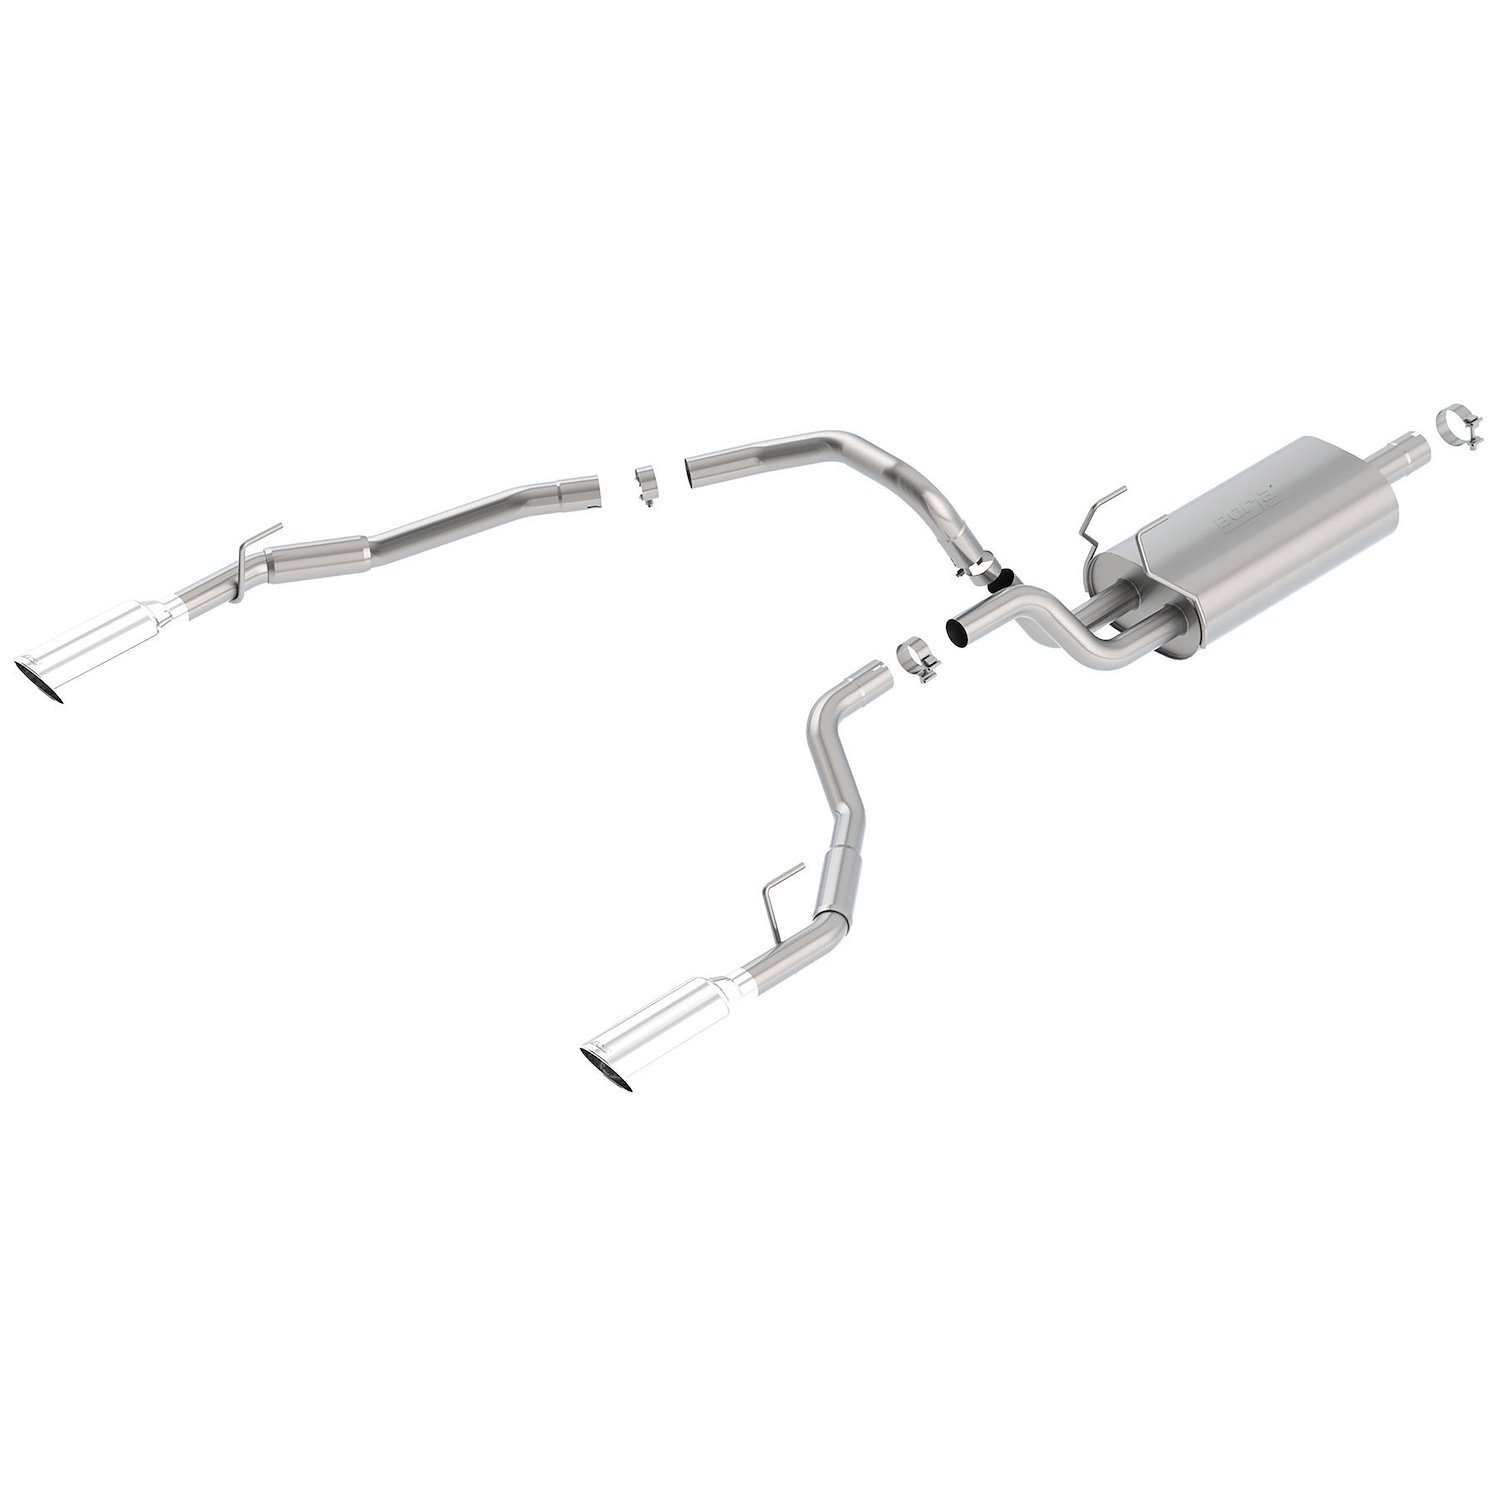 Ram 1500 Cat-Back Exhaust System